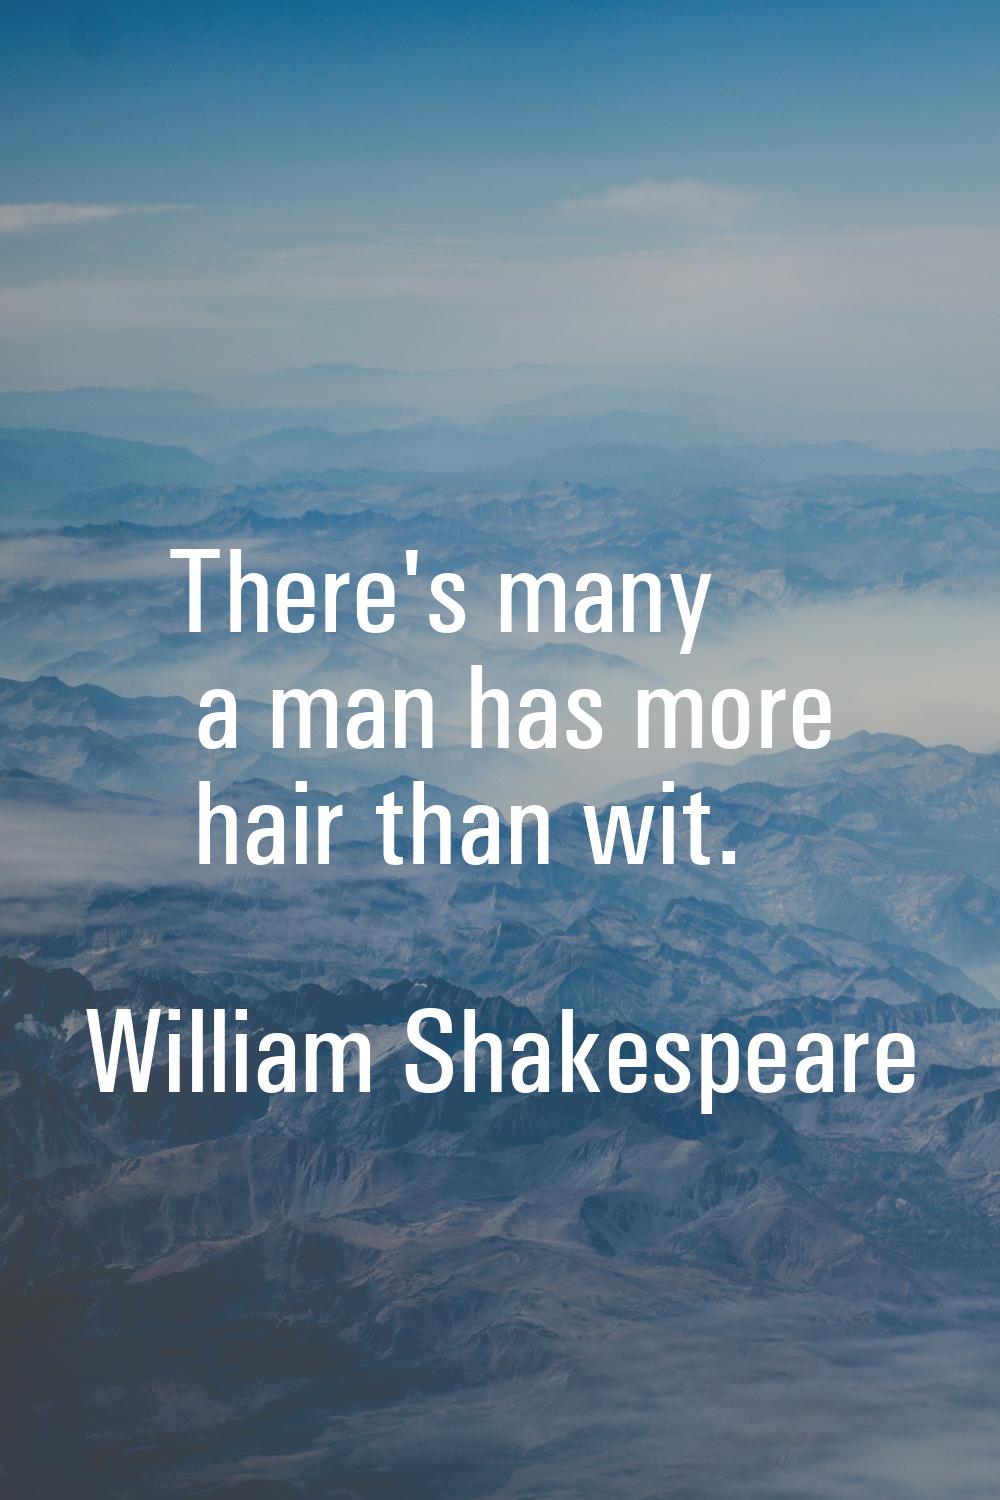 There's many a man has more hair than wit.